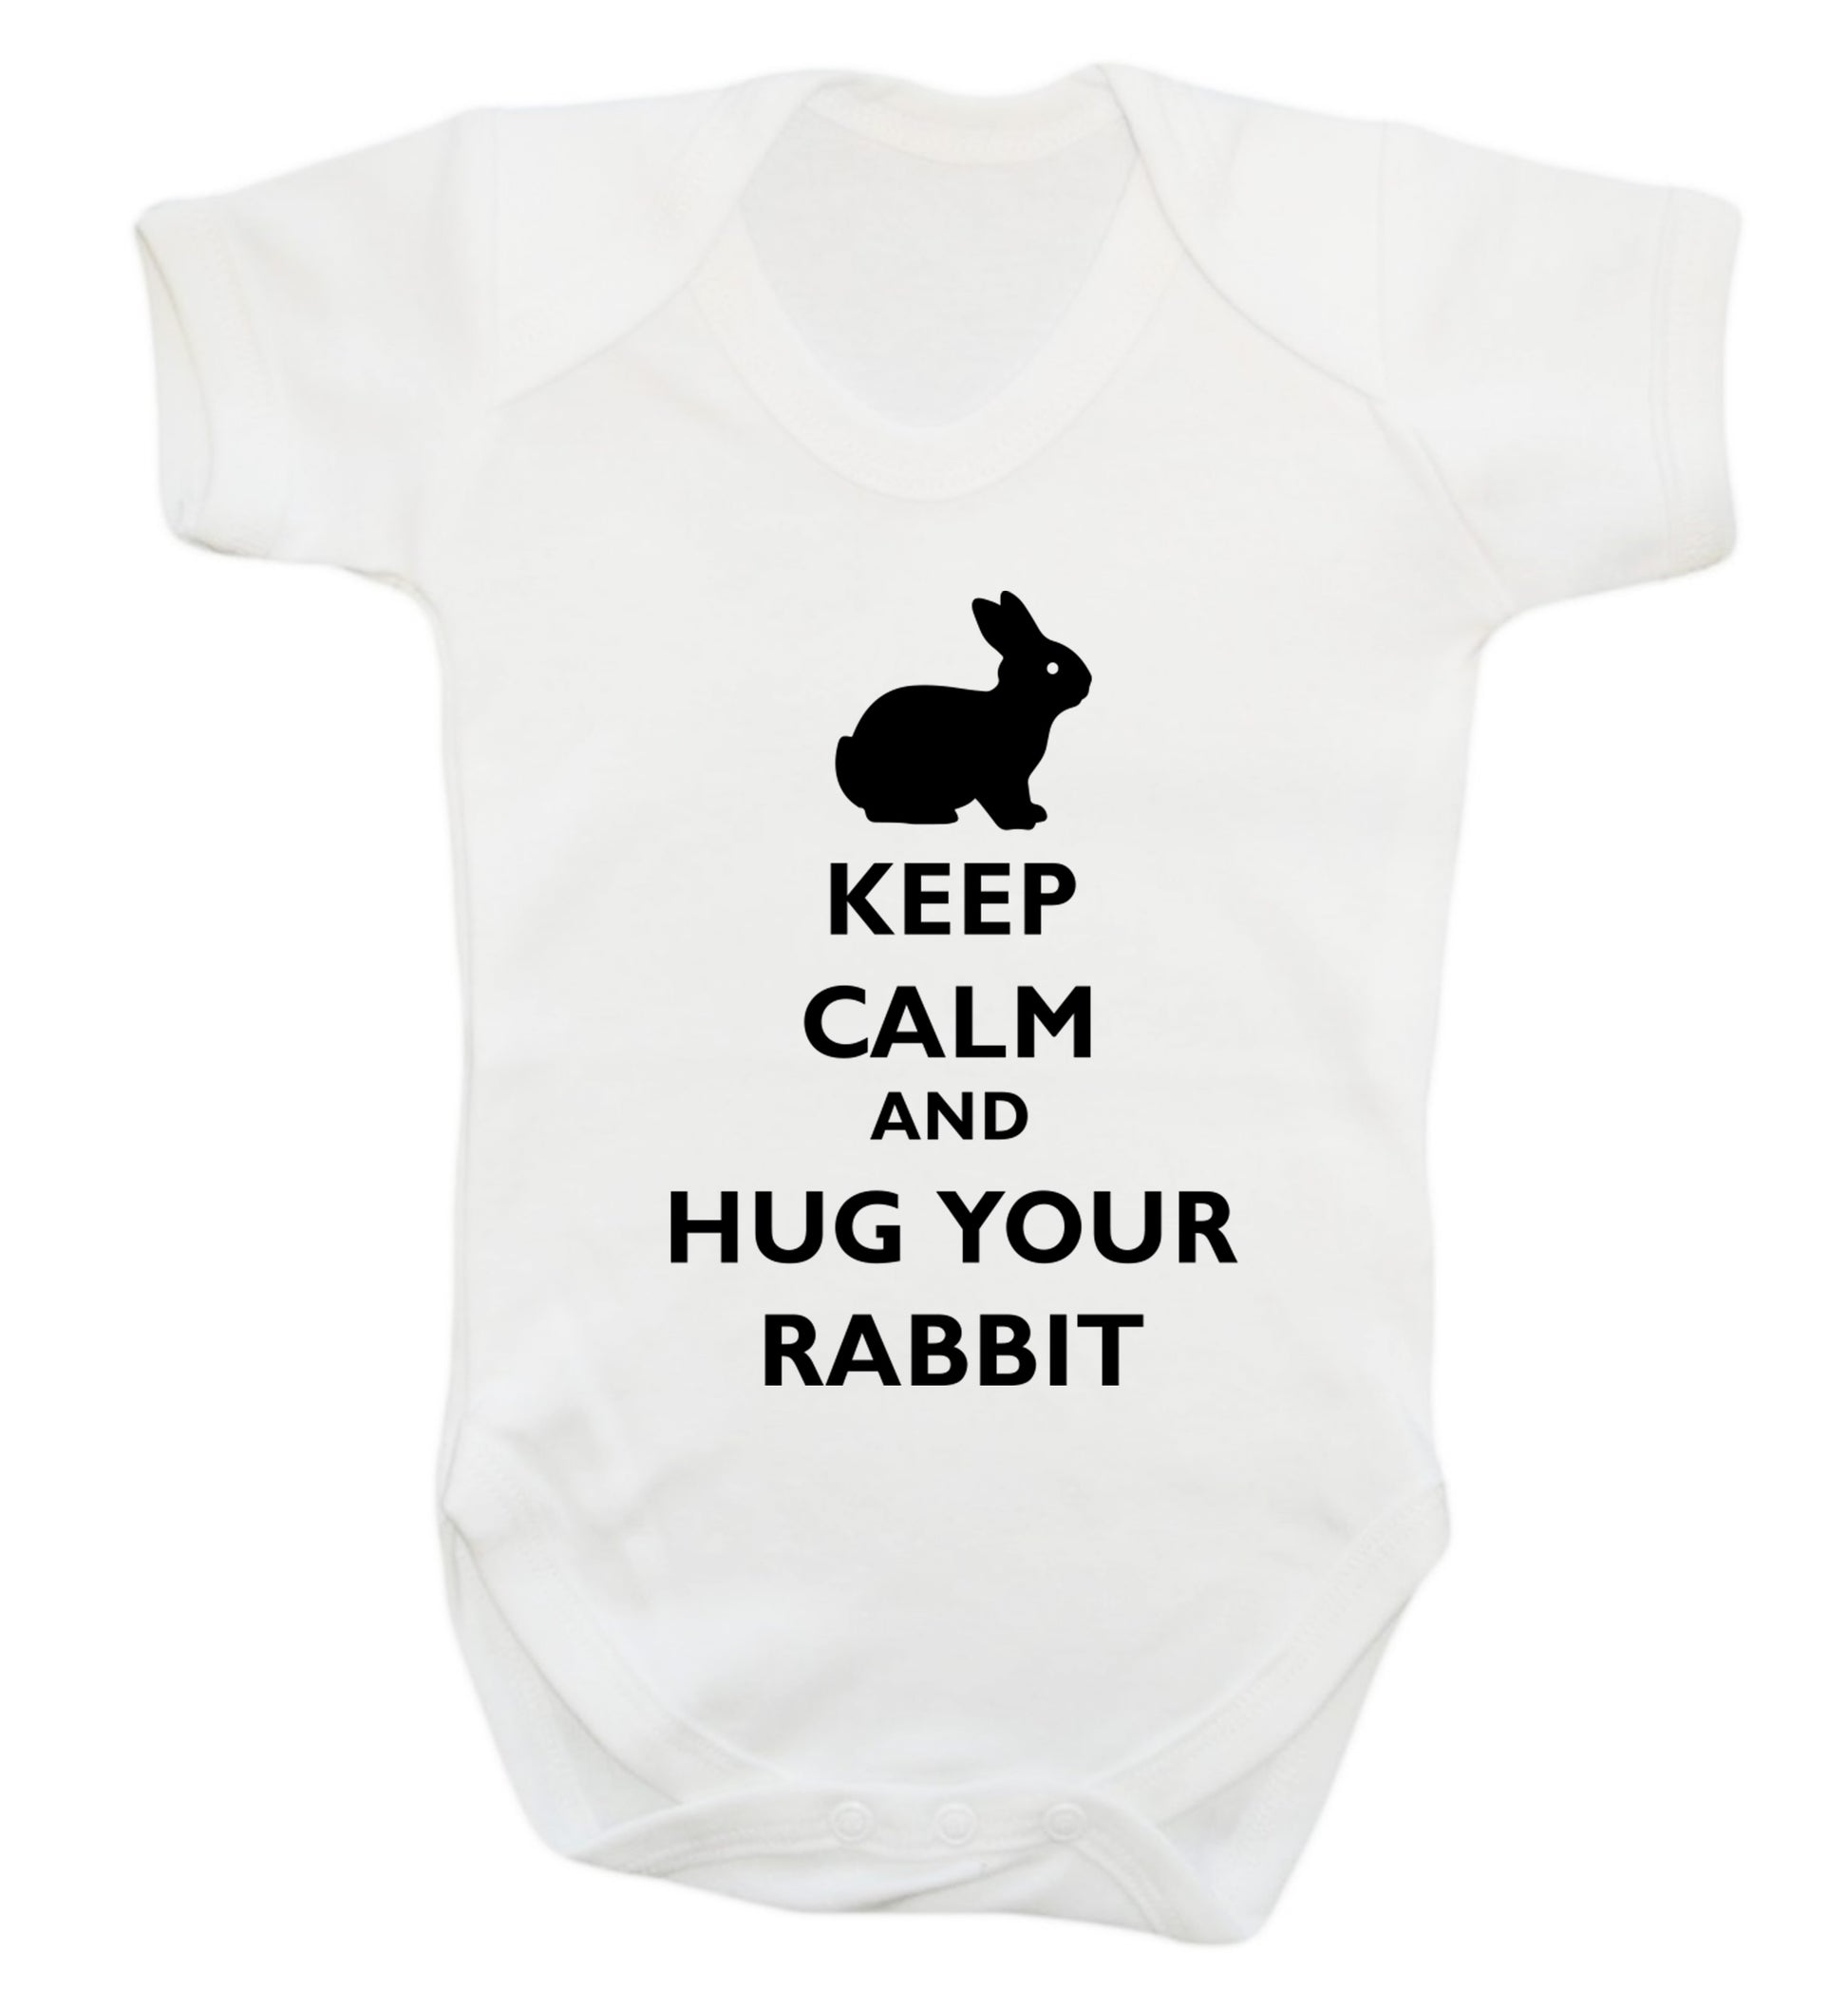 Keep calm and hug your rabbit Baby Vest white 18-24 months